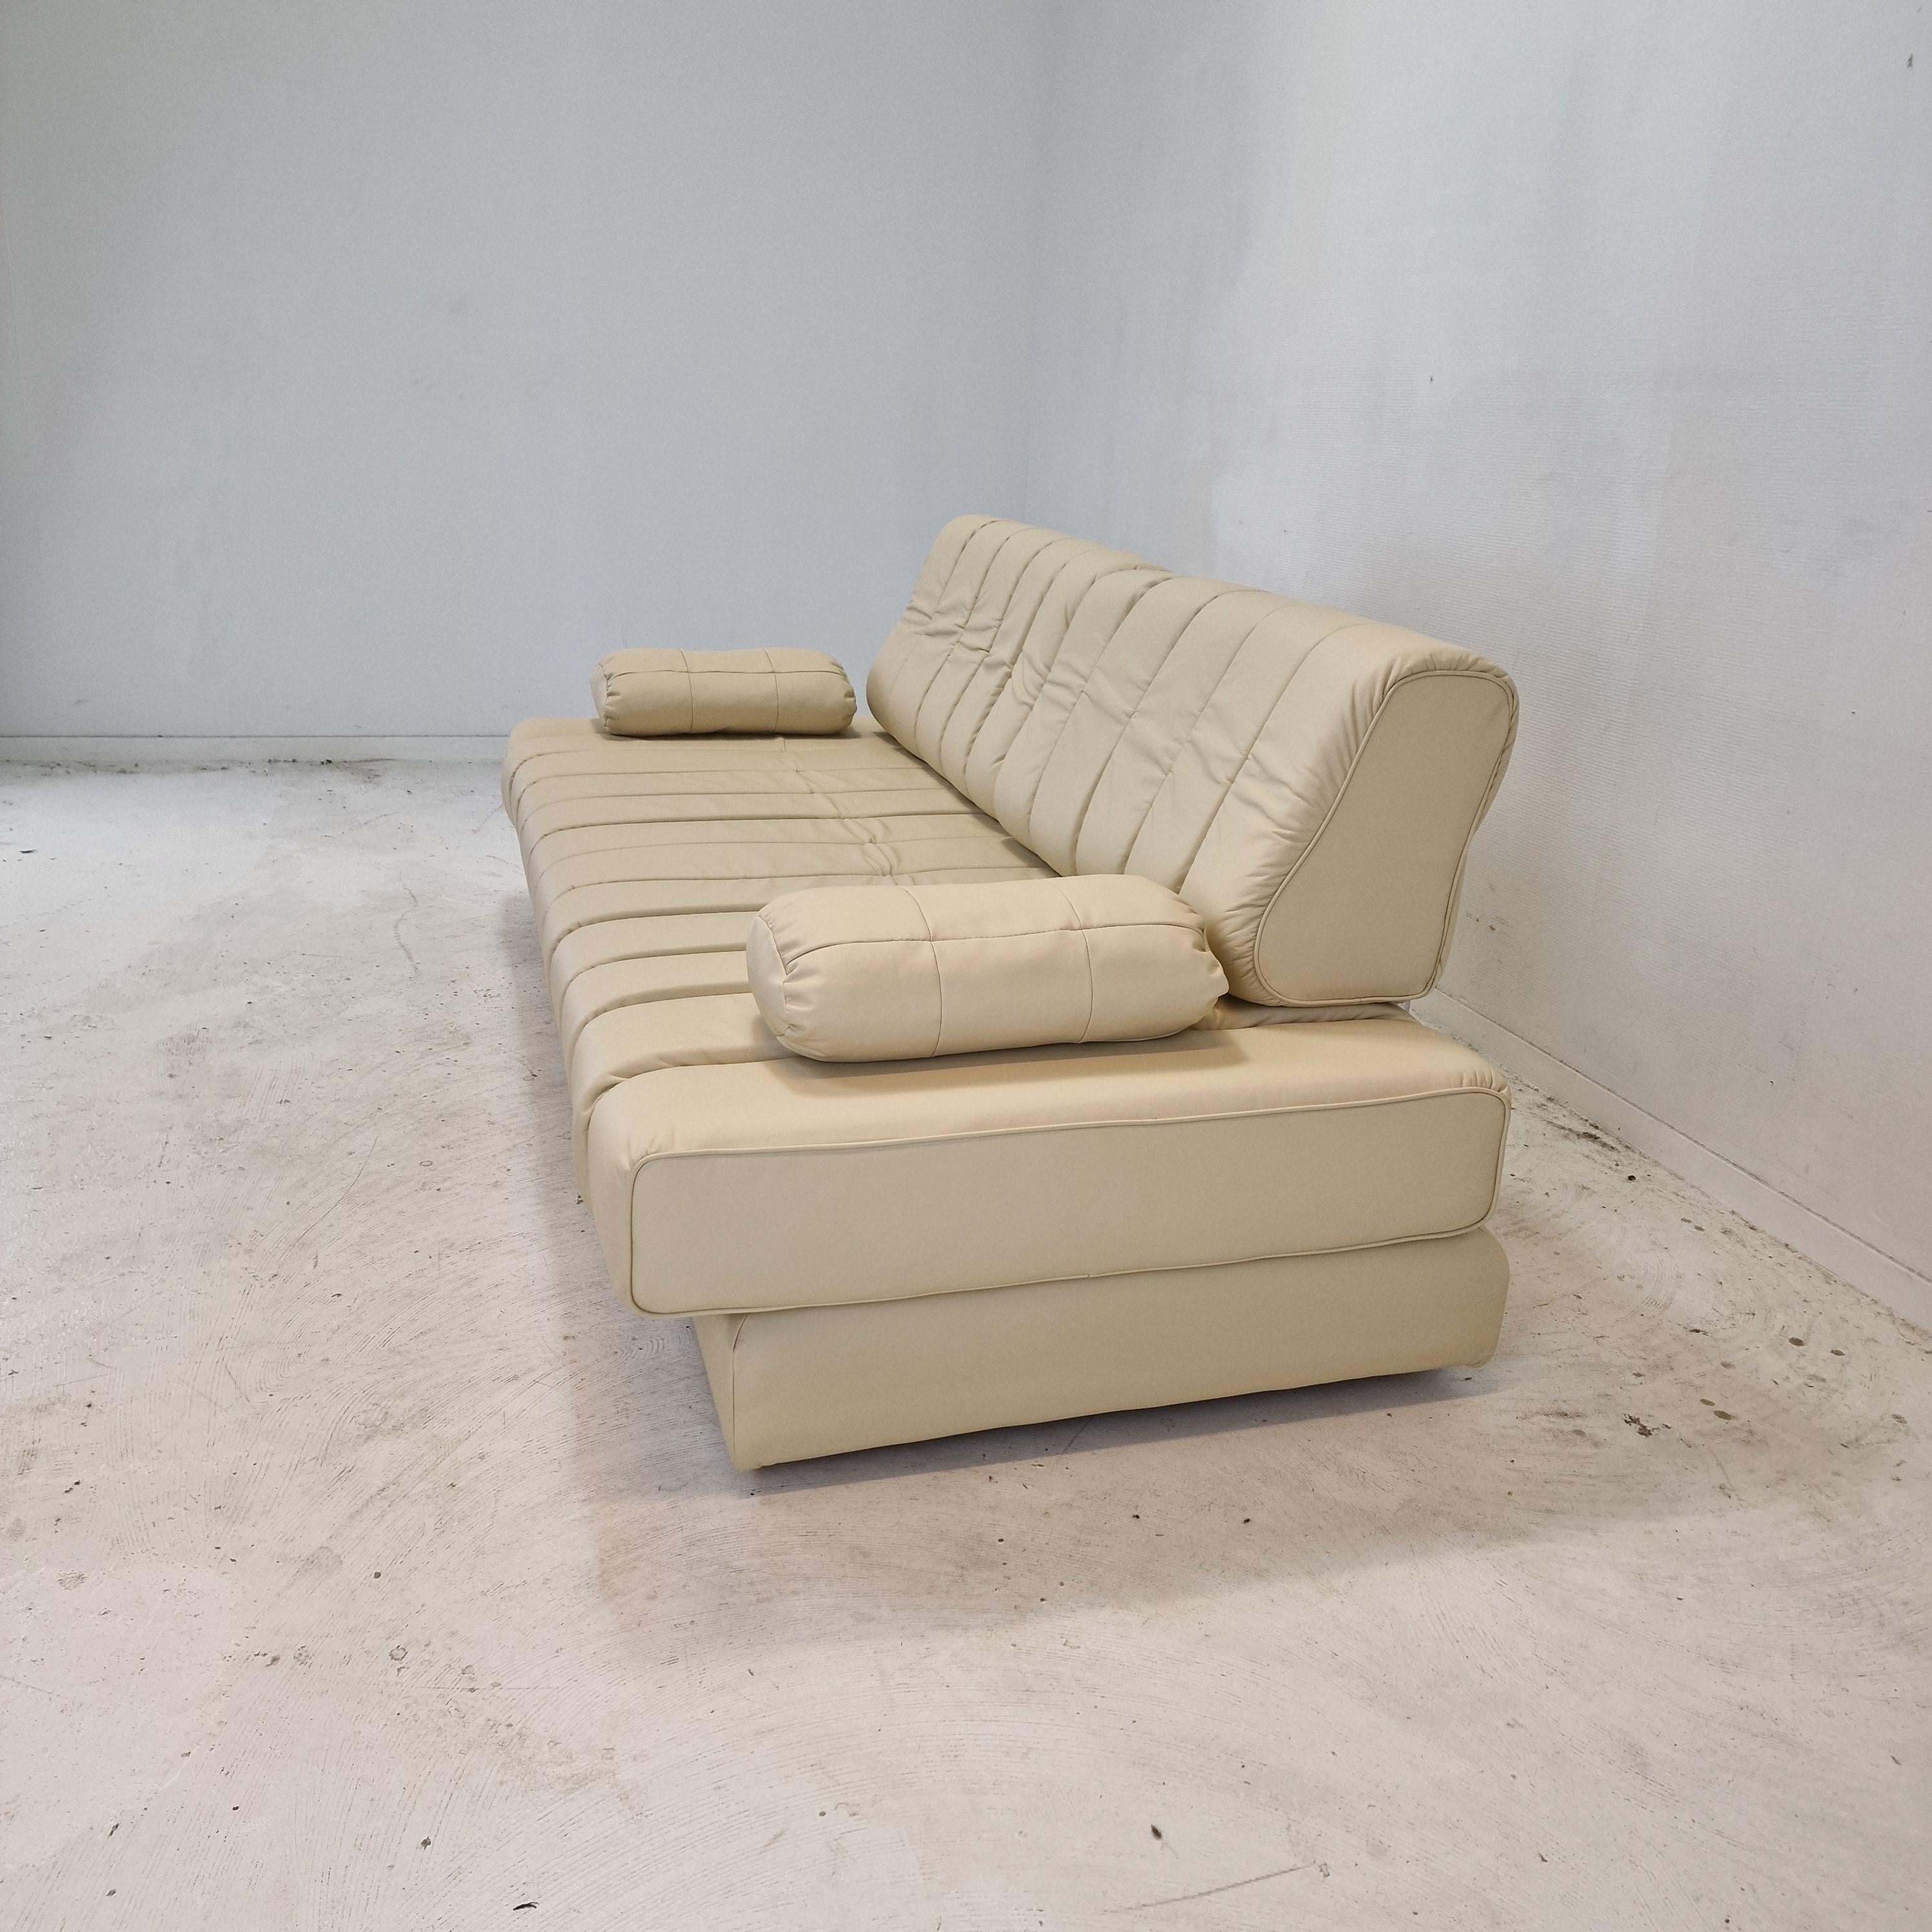 Swiss DS-85 Sofa or Daybed by De Sede, Switzerland 1970s For Sale